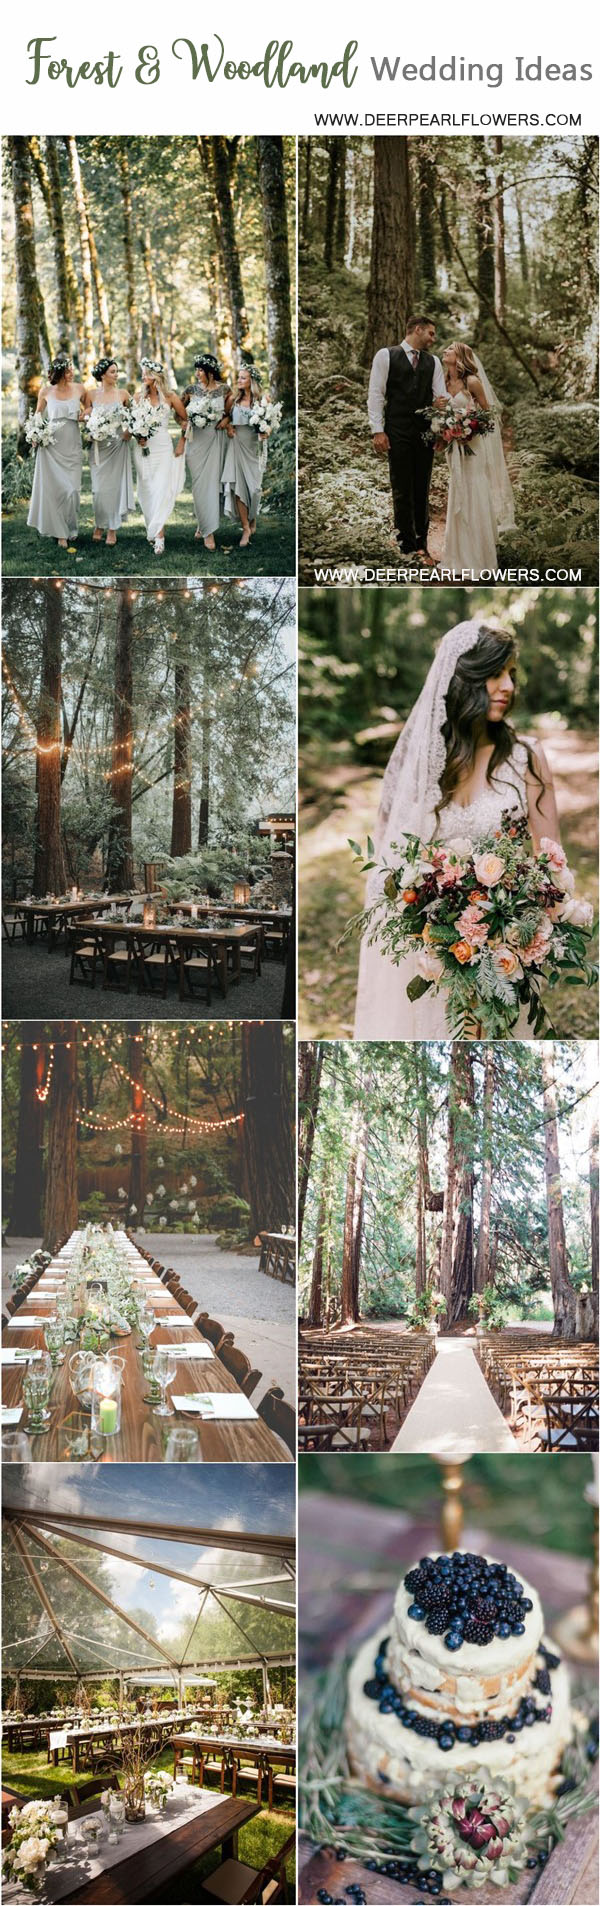 40 Forest And Woodland Wedding Theme Ideas Dpf 